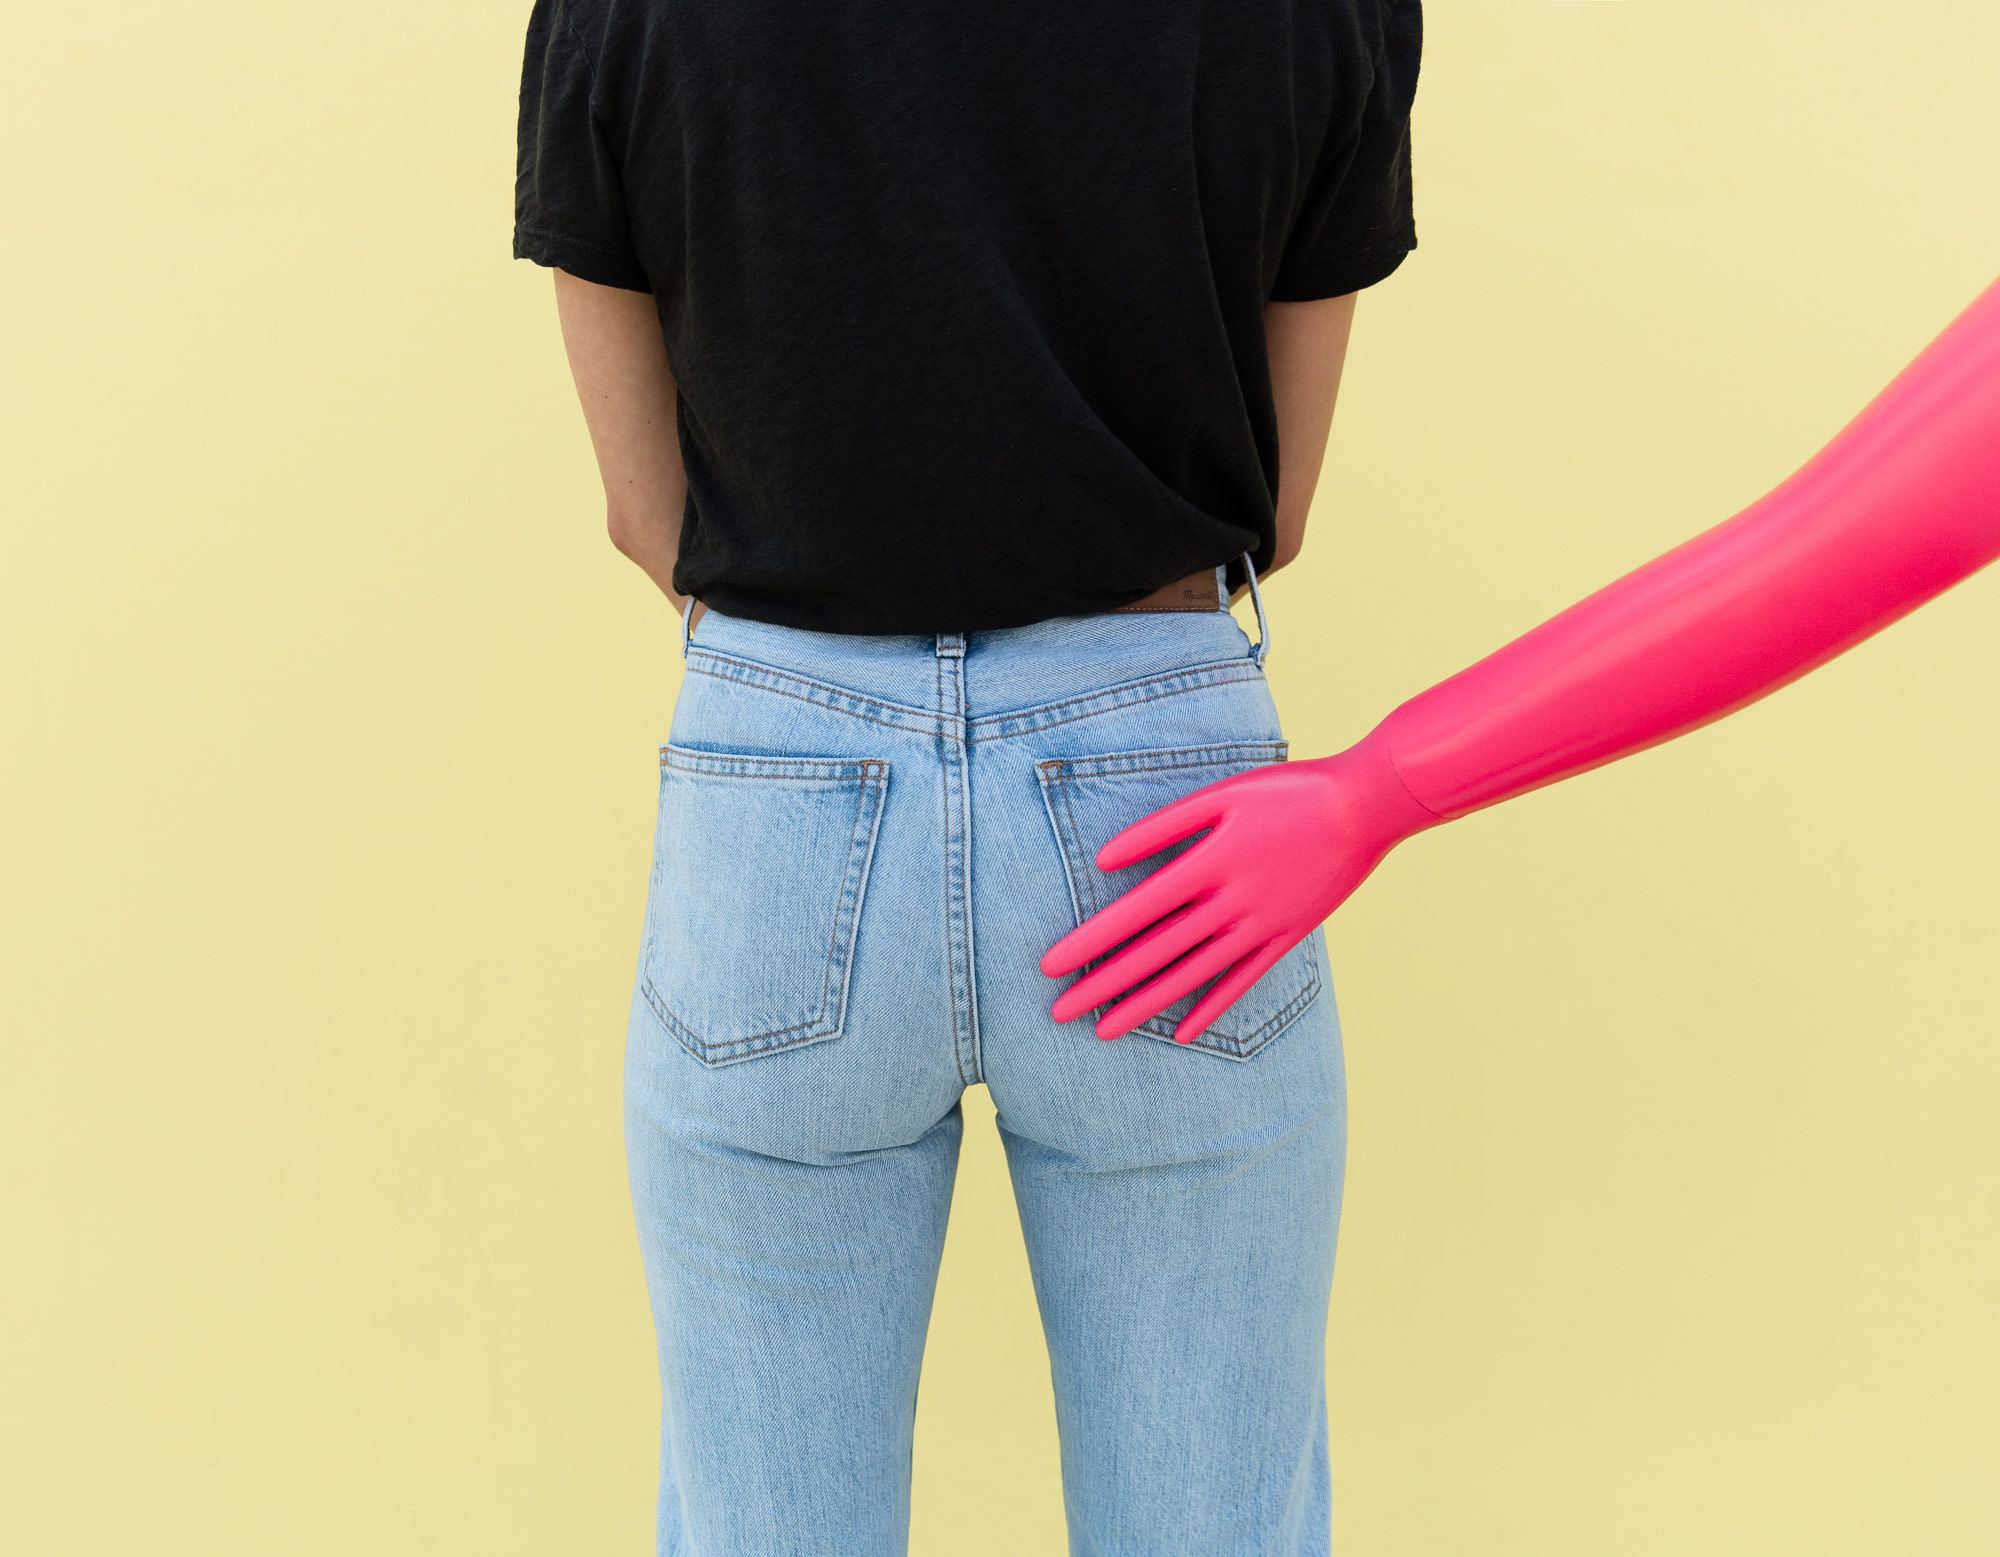 plastic hand on a woman's butt